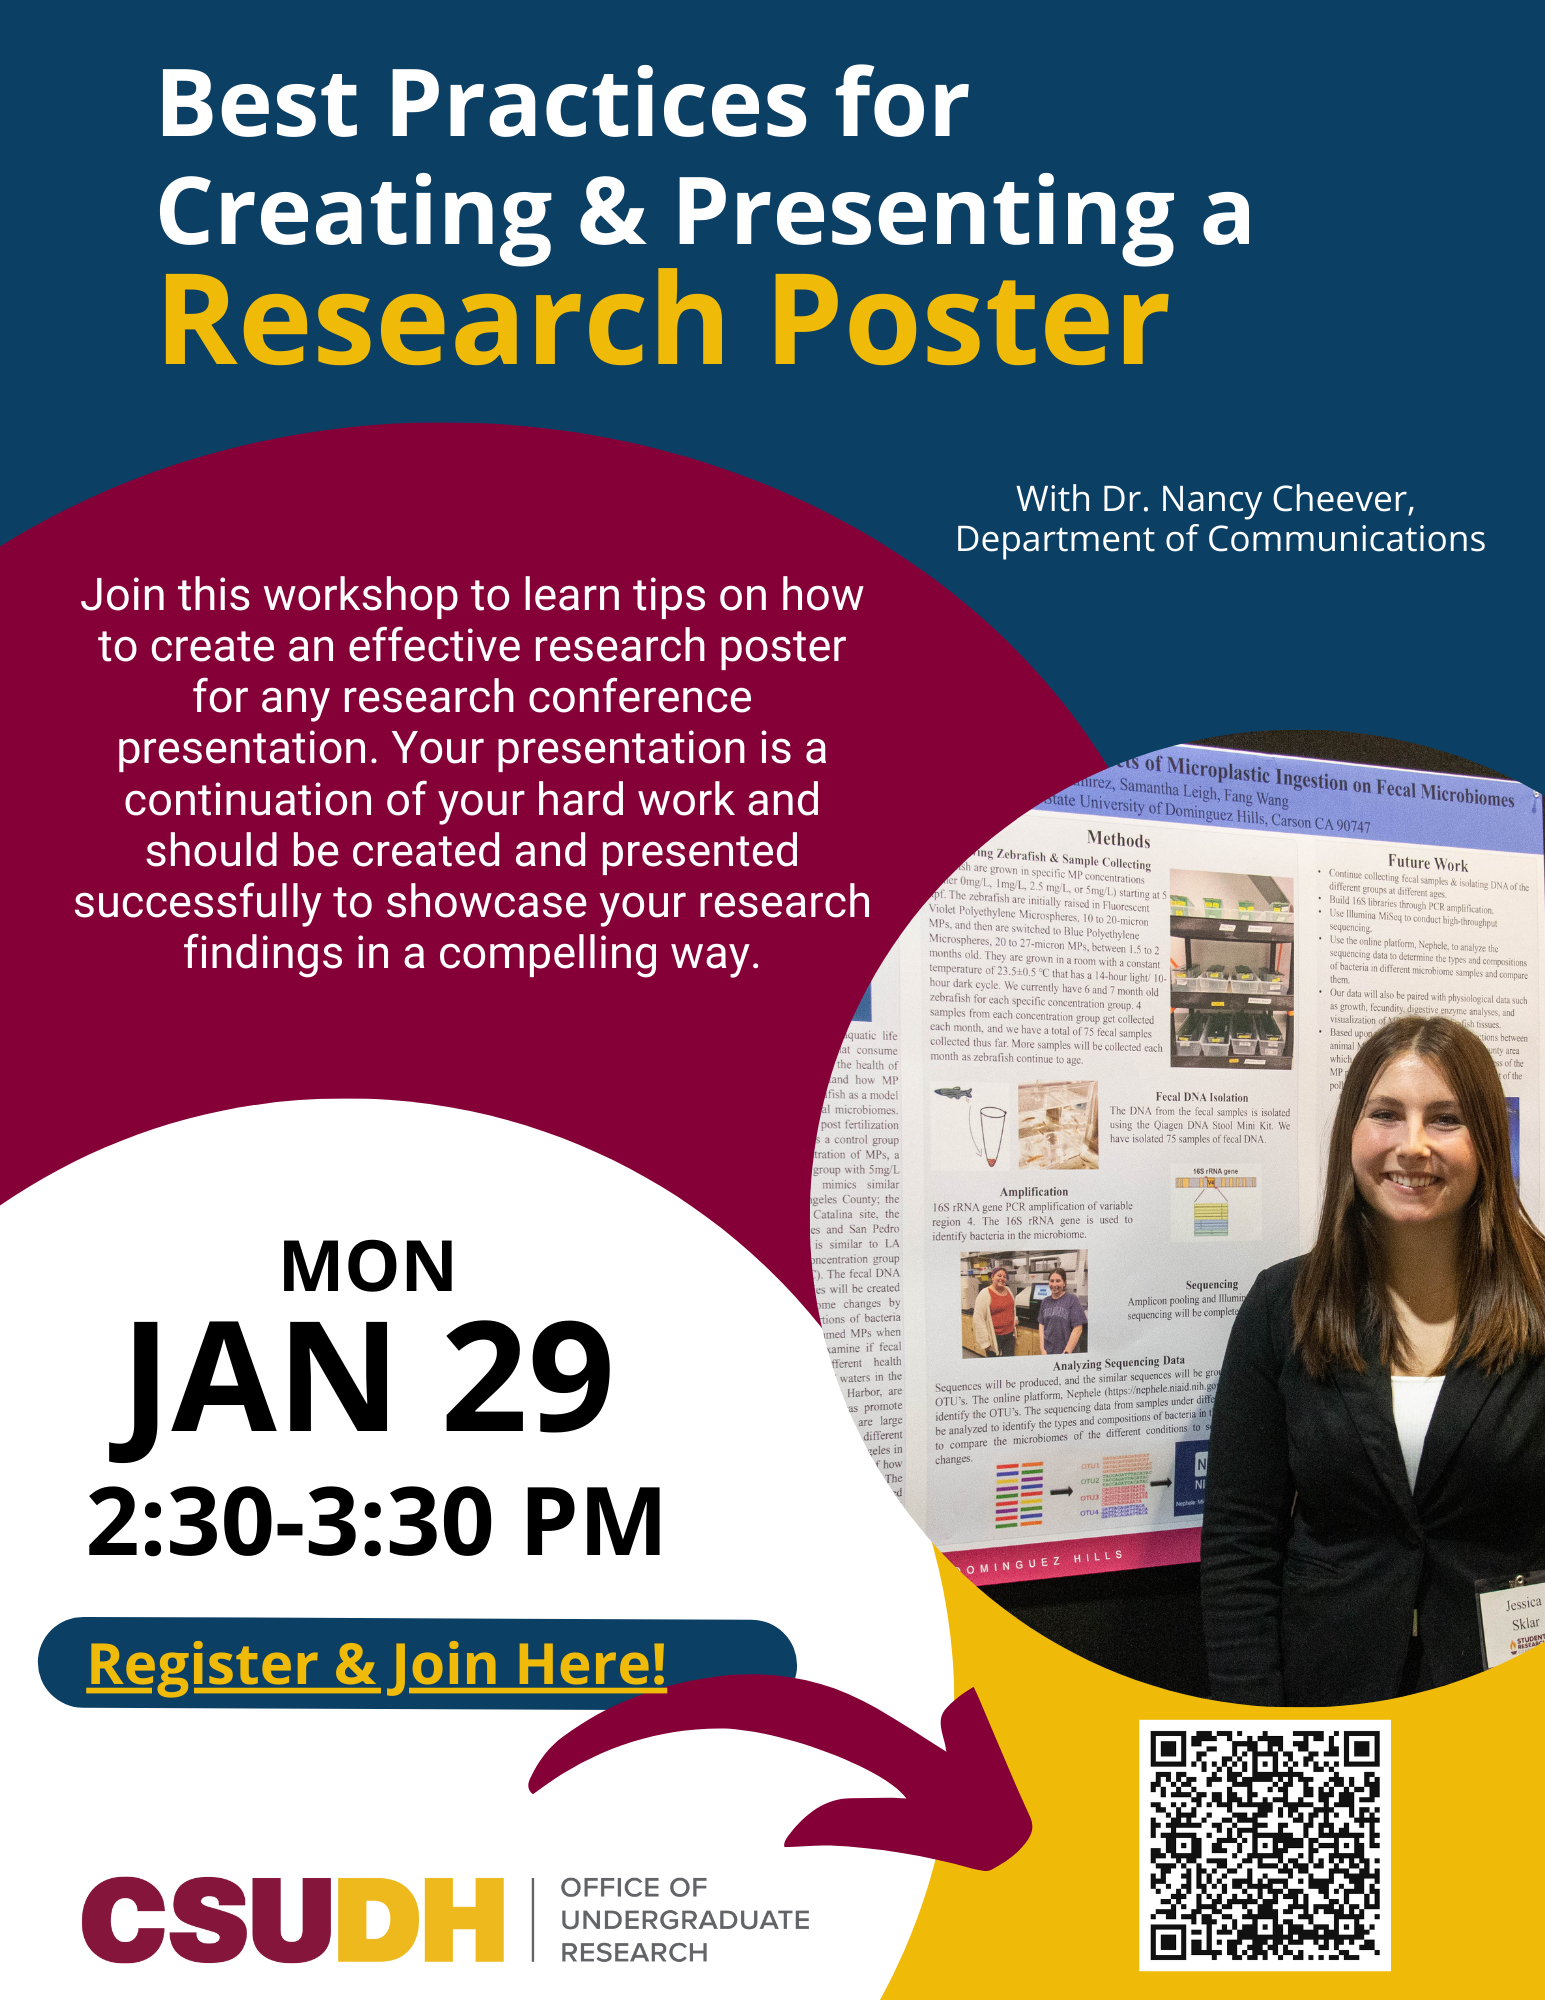 Best Practices for Creating & Presenting a Research Poster